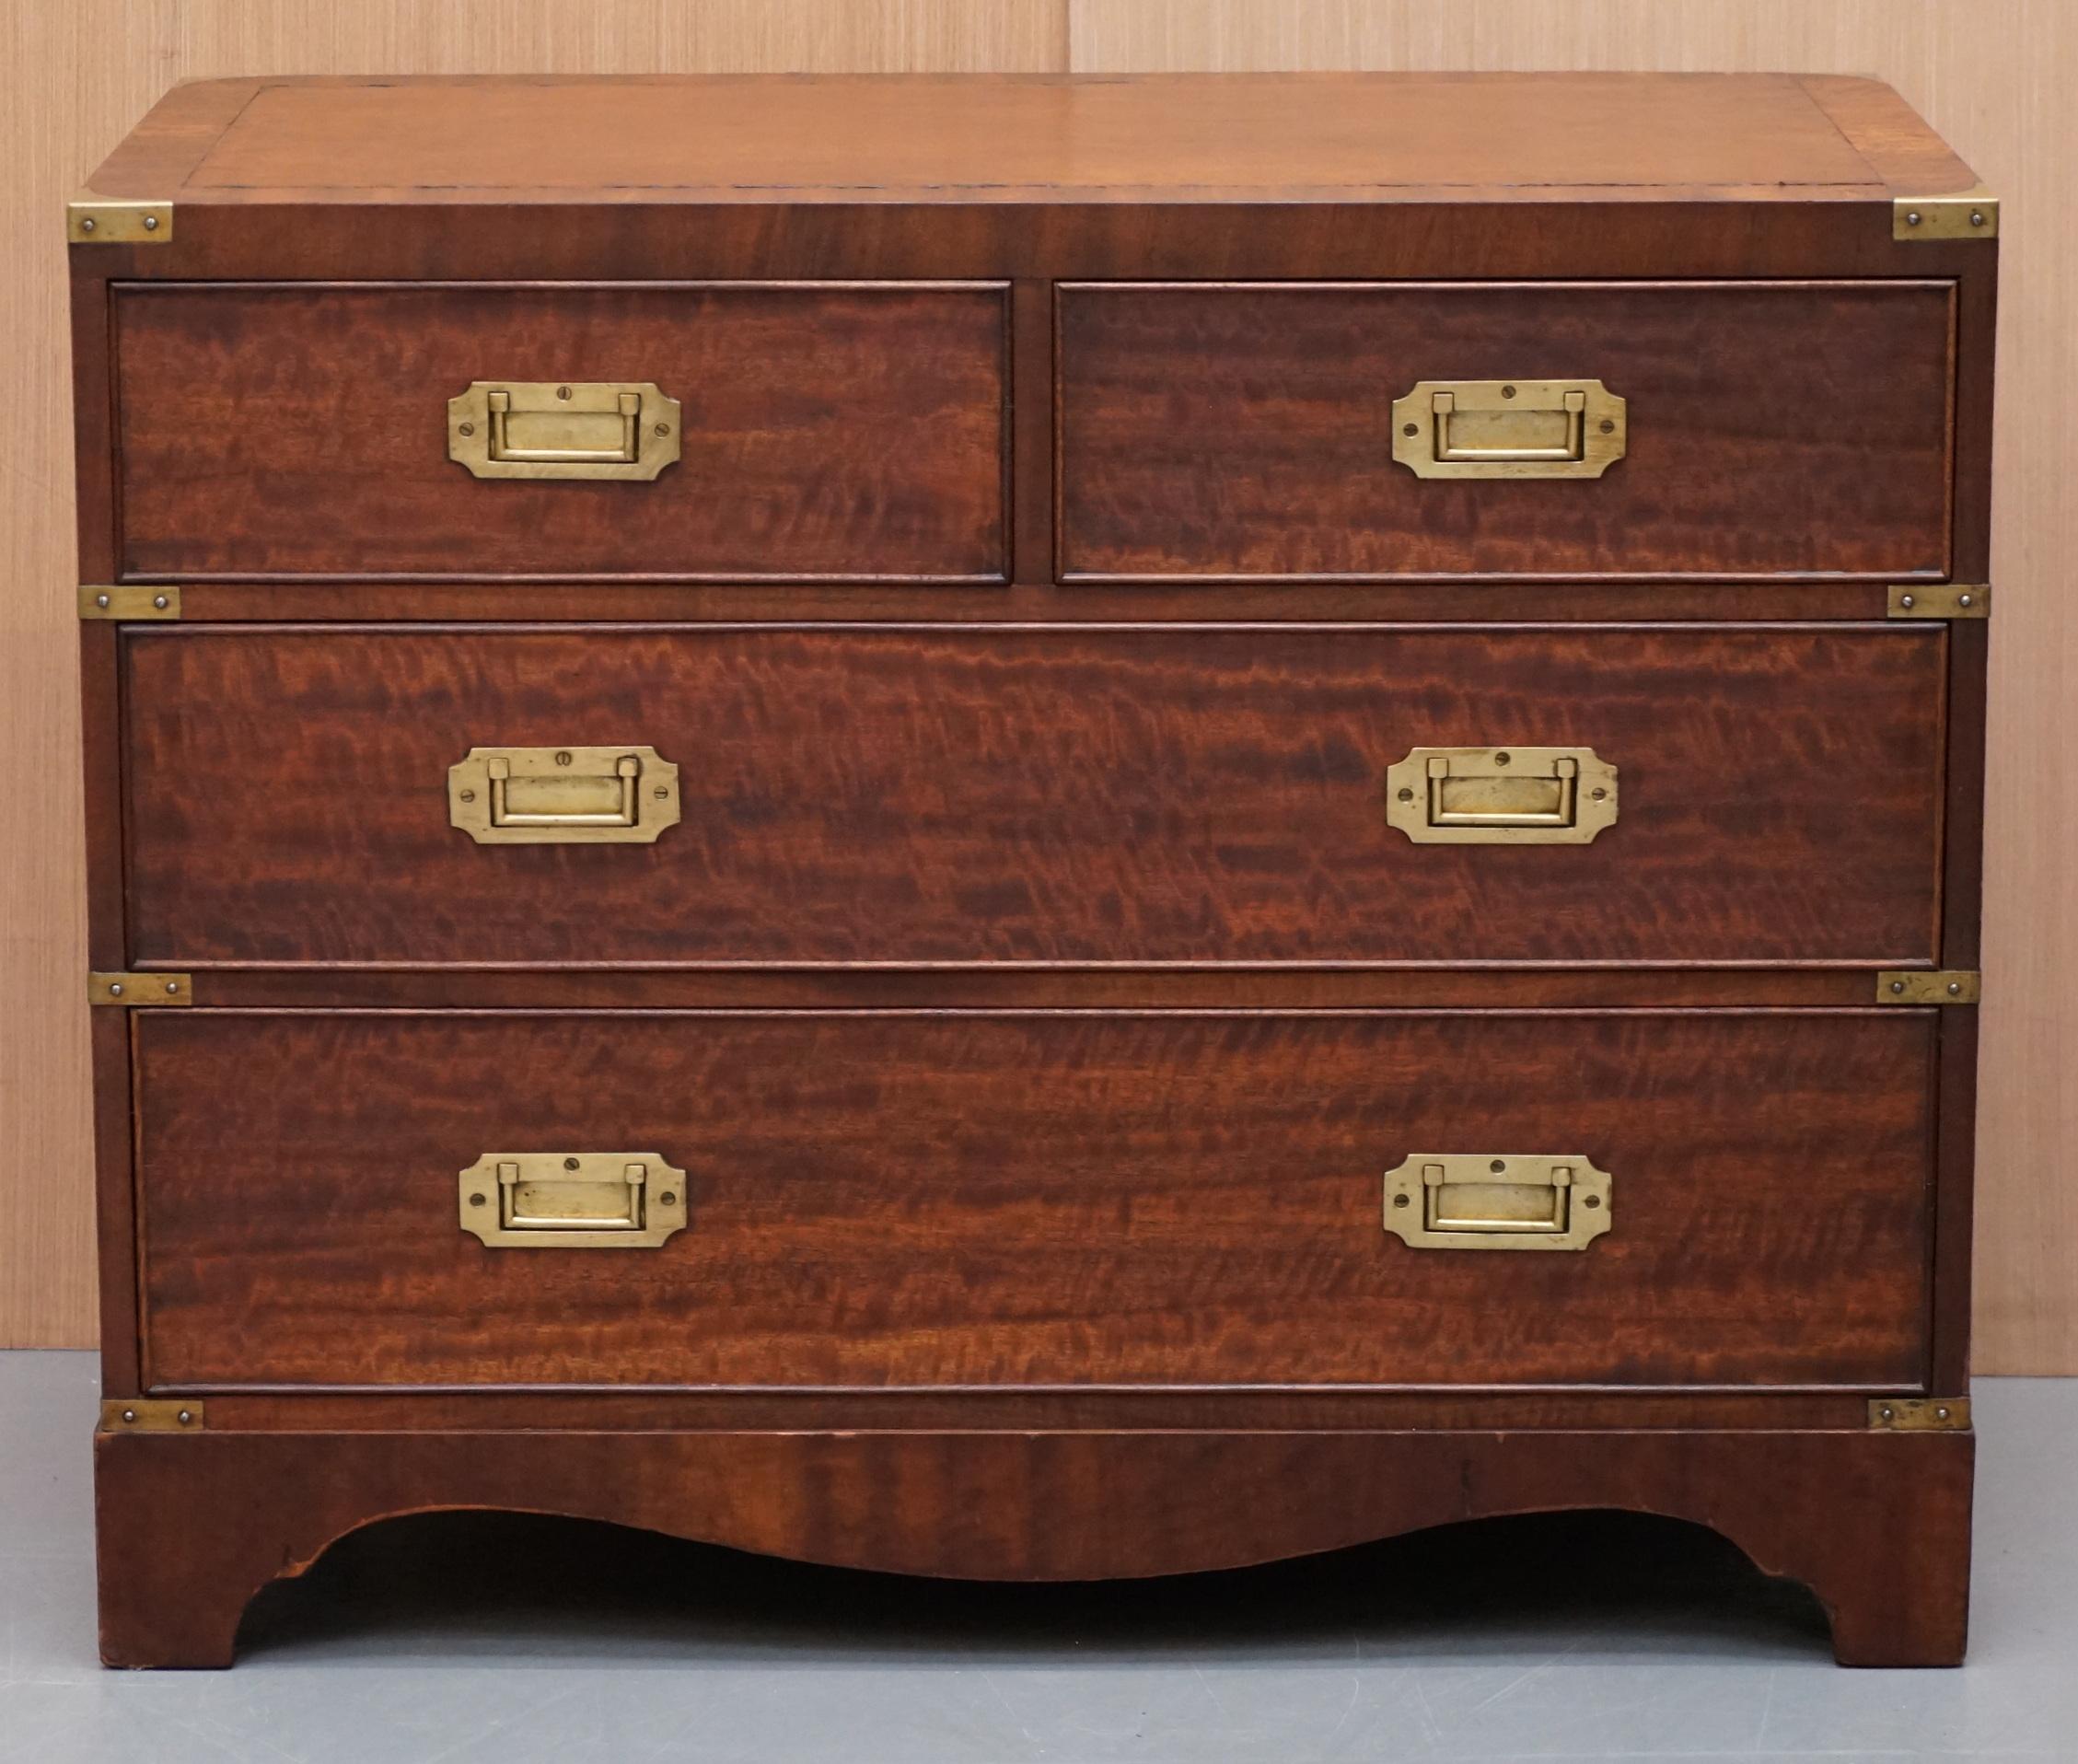 We are delighted to offer for sale this lovely vintage mahogany campaign chest of drawers with brown leather top

A good looking vintage set of military campaign drawers with brown leather top, ideal as a tv stand

The top is original and has a